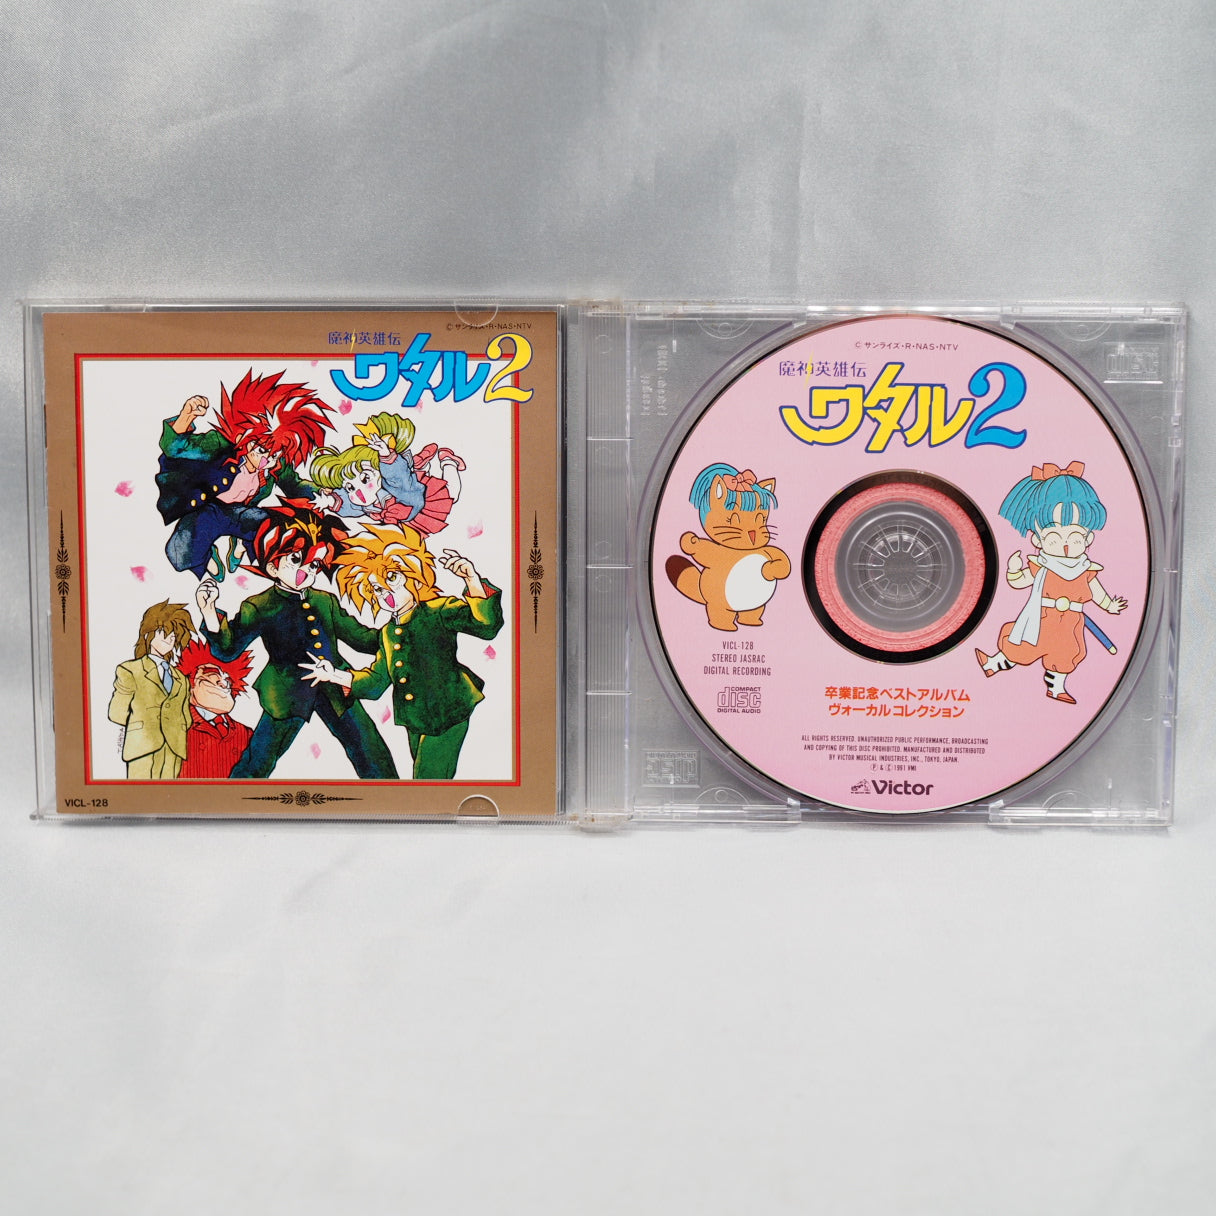 MASHIN HERO WATARU 2: Legend of the Magus Heroes 2 [Limited First Edition] Original Soundtrack